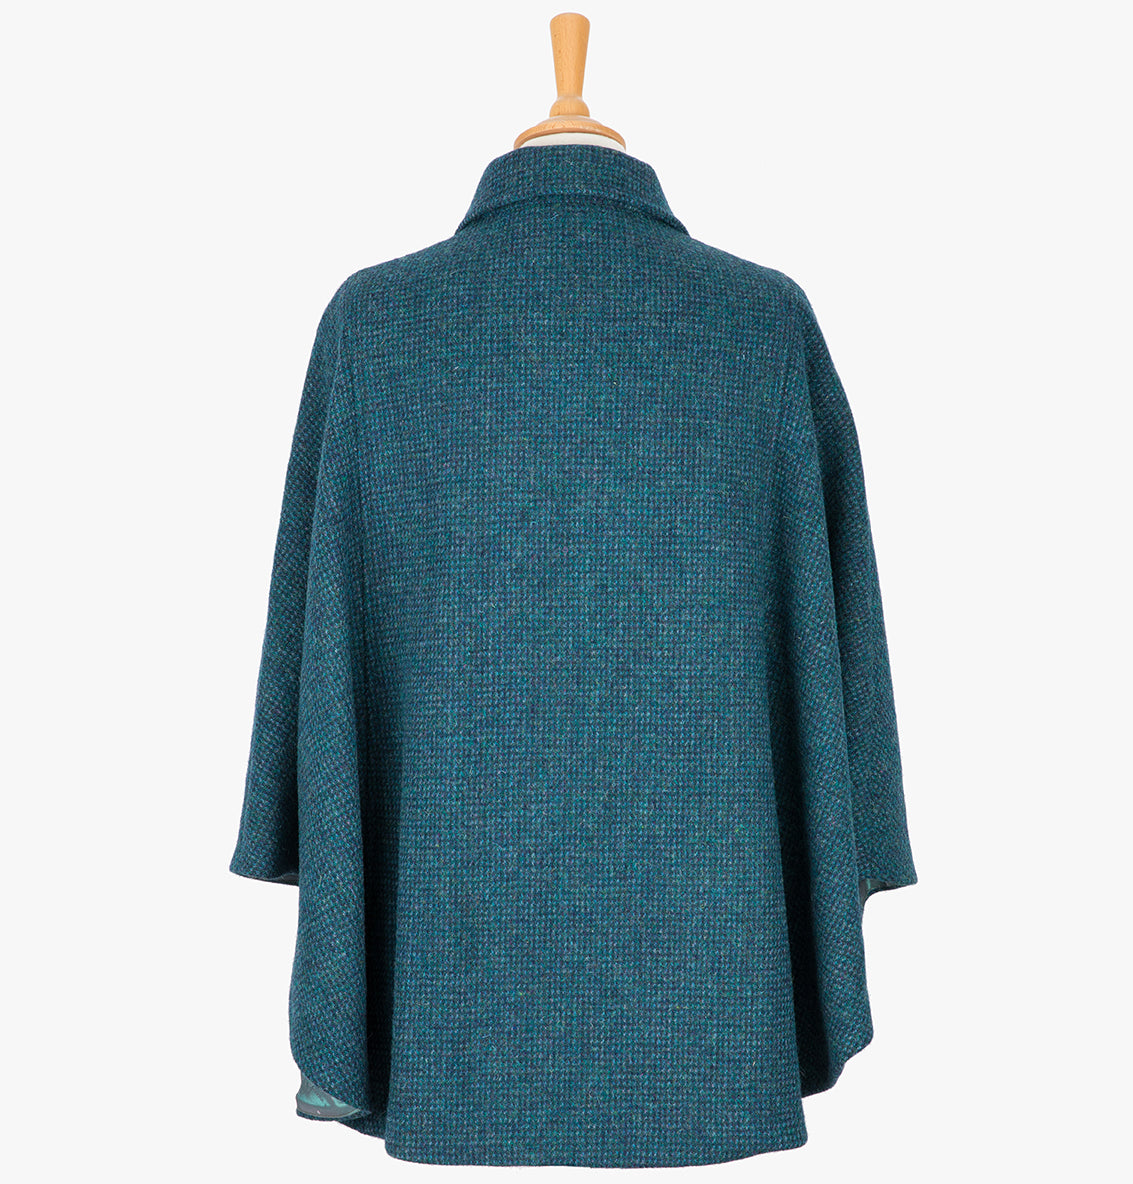 This is the rear view of the cape in Teal, the colour is  teal and navy subtle houndstooth check. You can see the collar folded down and the cape draping beautifully at the back.